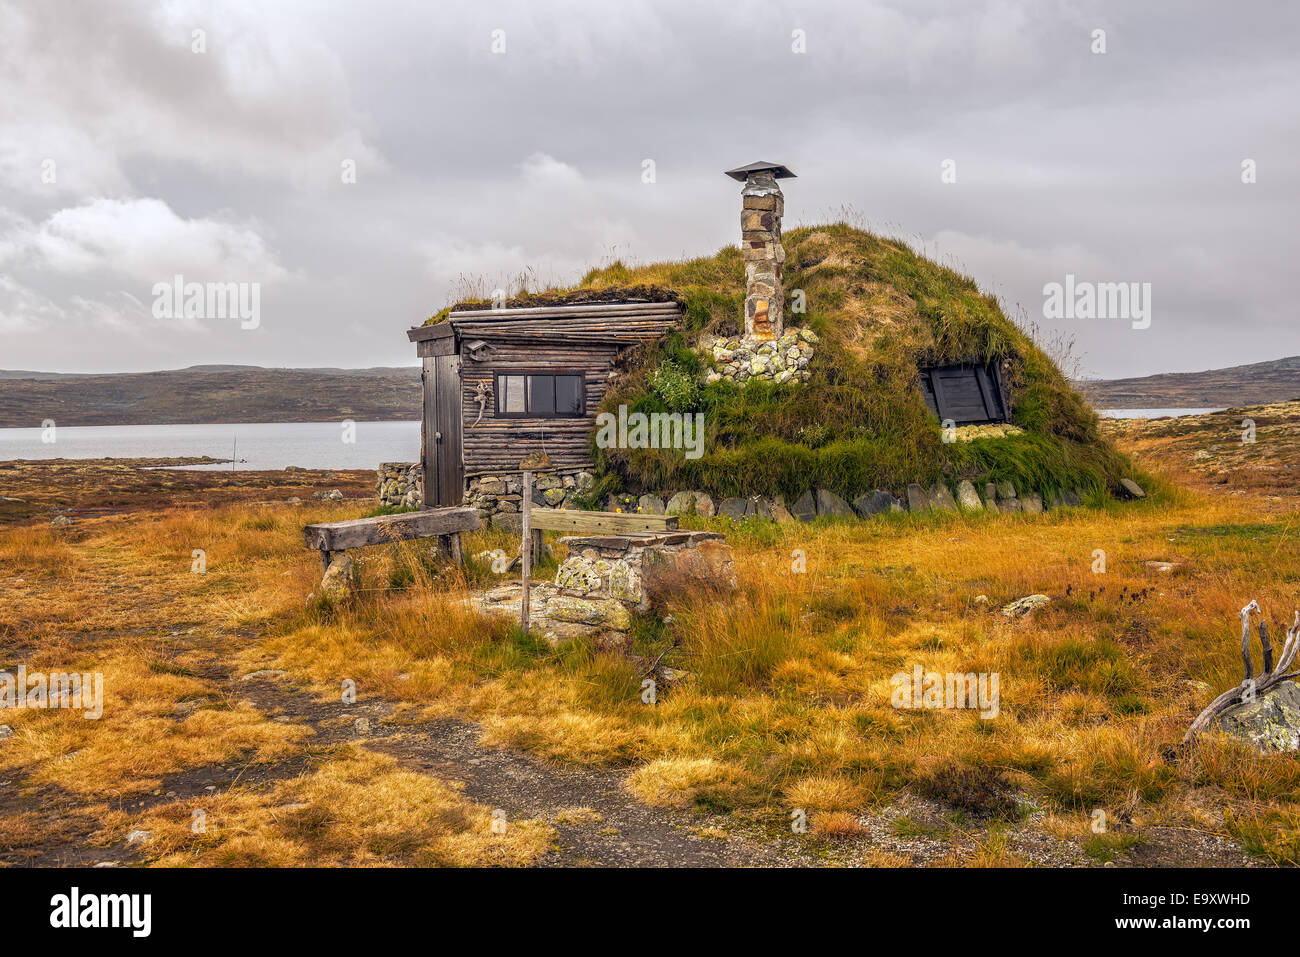 Cabin with turf roof near Hardangervidda National Park with a lake in the background, Hordaland county, Norway Stock Photo